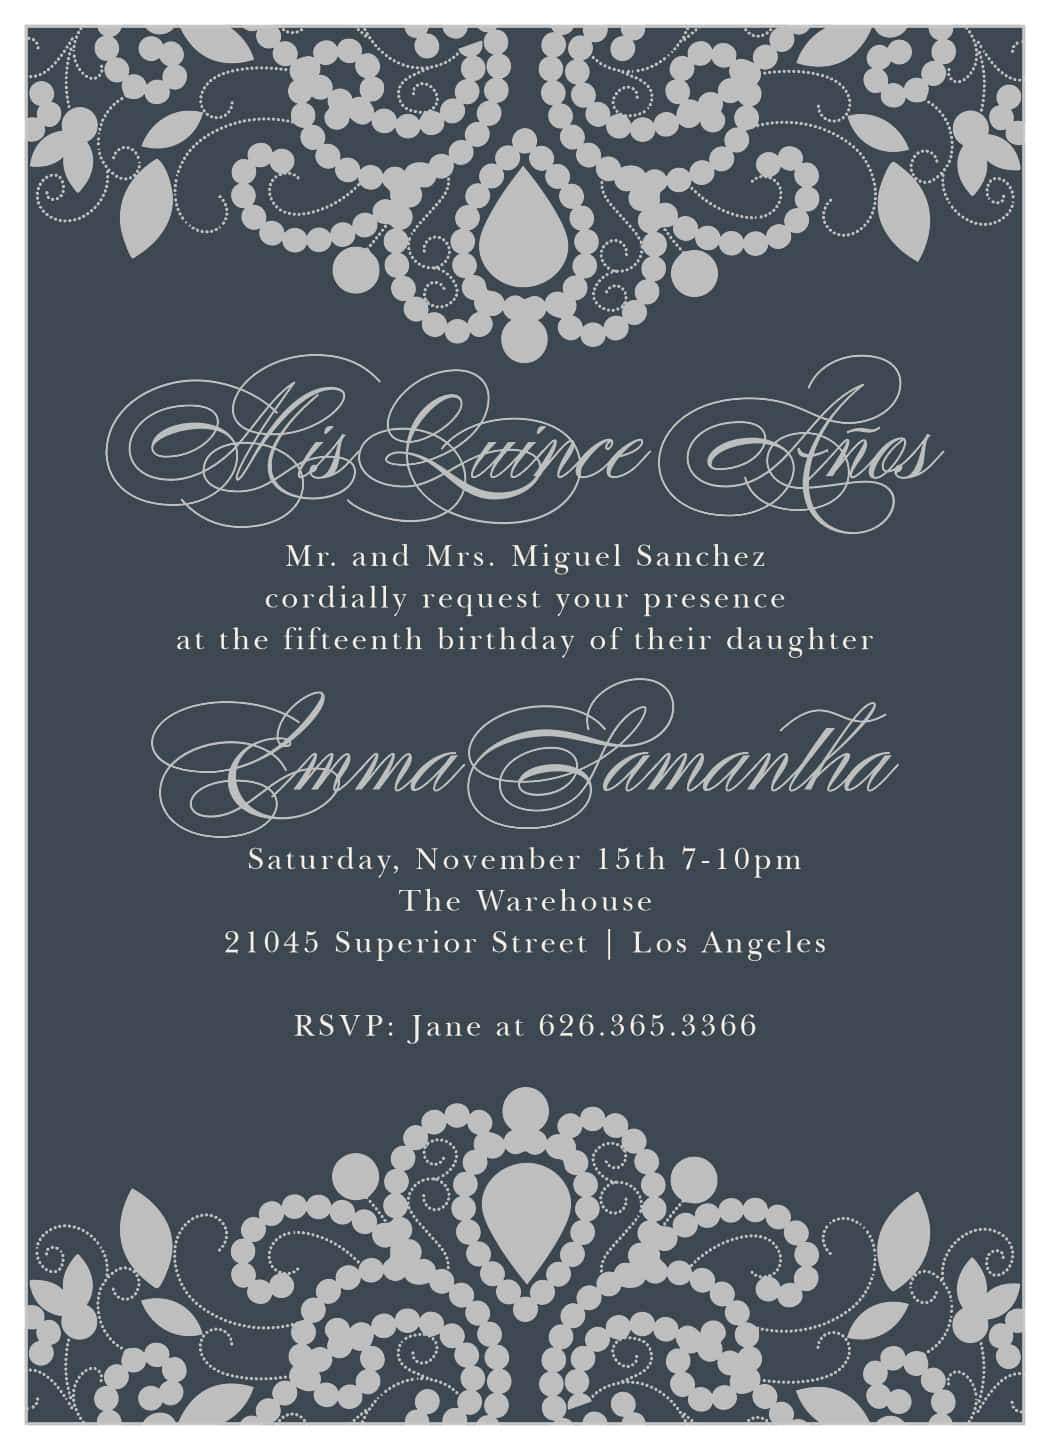 A Gray And Silver Lace Invitation With A White Border